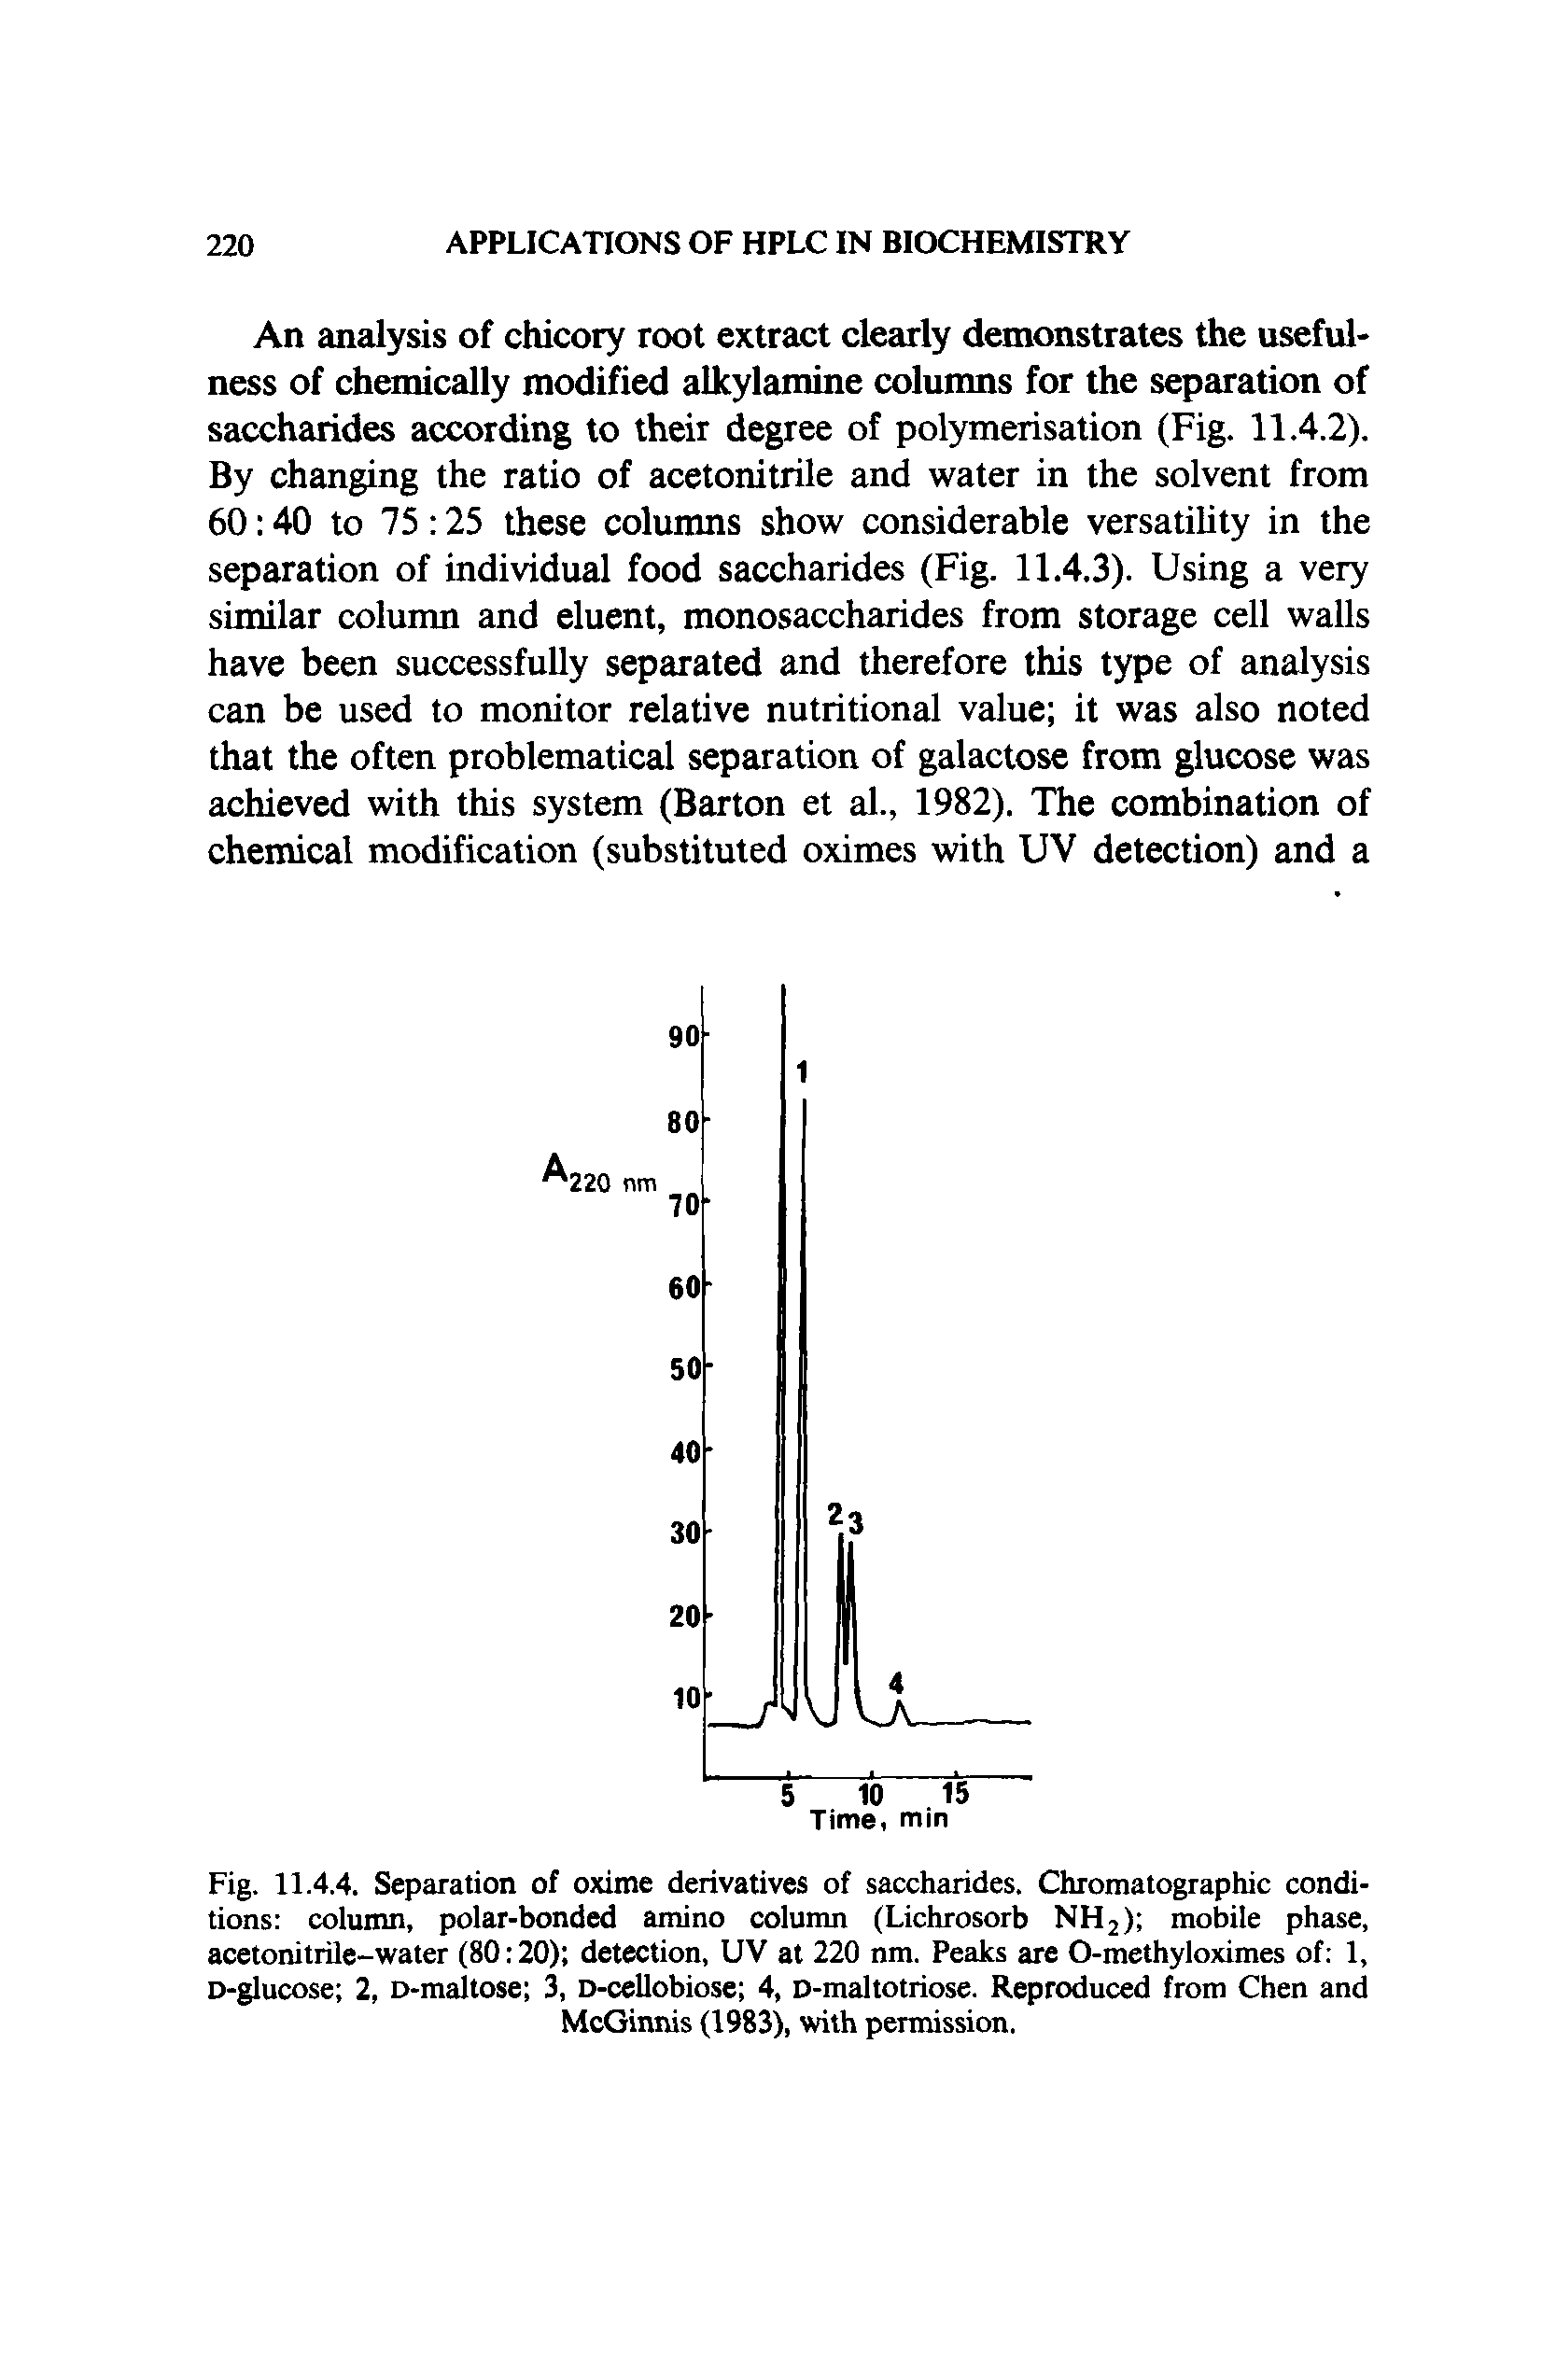 Fig. 11.4.4. Separation of oxime derivatives of saccharides. Chromatographic conditions column, polar-bonded amino column (Lichrosorb NH2) mobile phase, acetonitrile-water (80 20) detection, UV at 220 nm. Peaks are O-methyloximes of 1, D-glucose 2, D-maltose 3, D-cellobiose 4, D-maltotriose. Reproduced from Chen and McGinnis (1983), with permission.